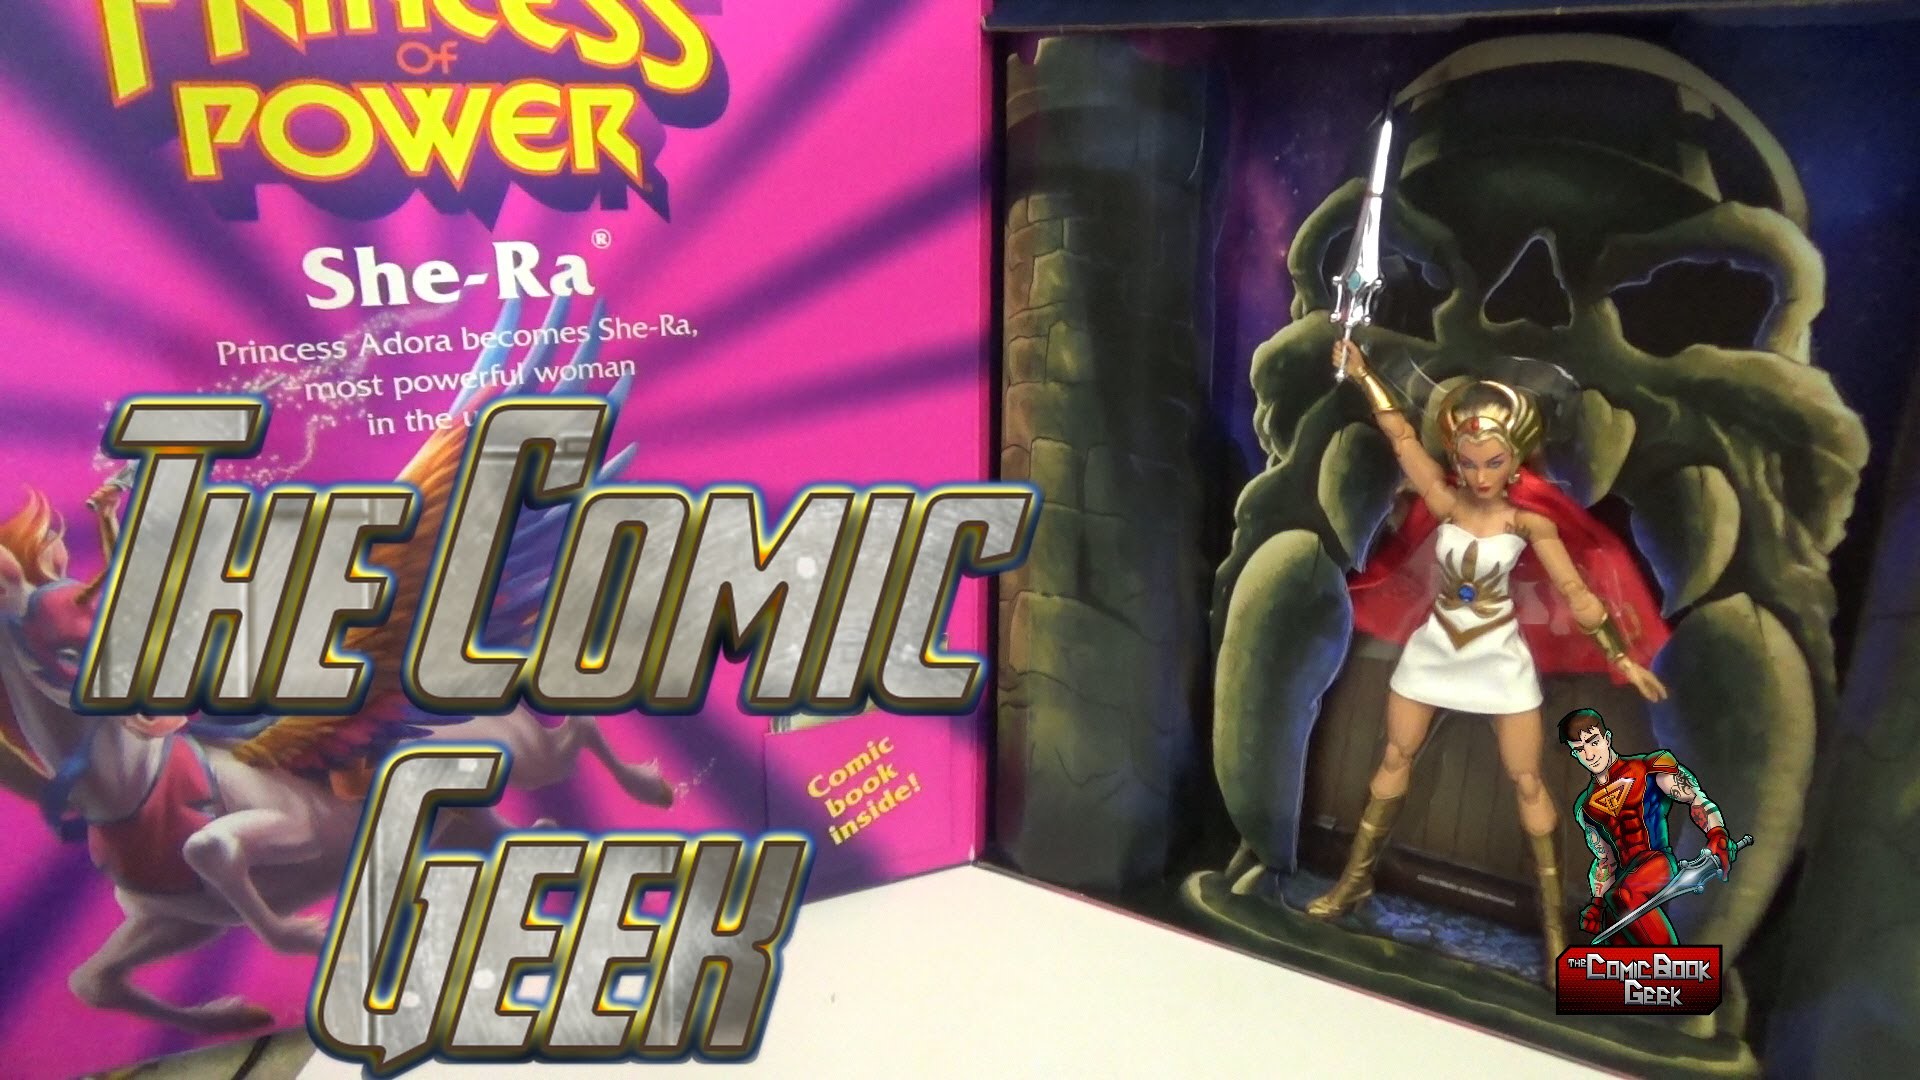 1920x1080 She-Ra - Mattel SDCC 2016 Exclusive 11" Figure (NOT Barbie) Unboxing &  Review - Princess of Power